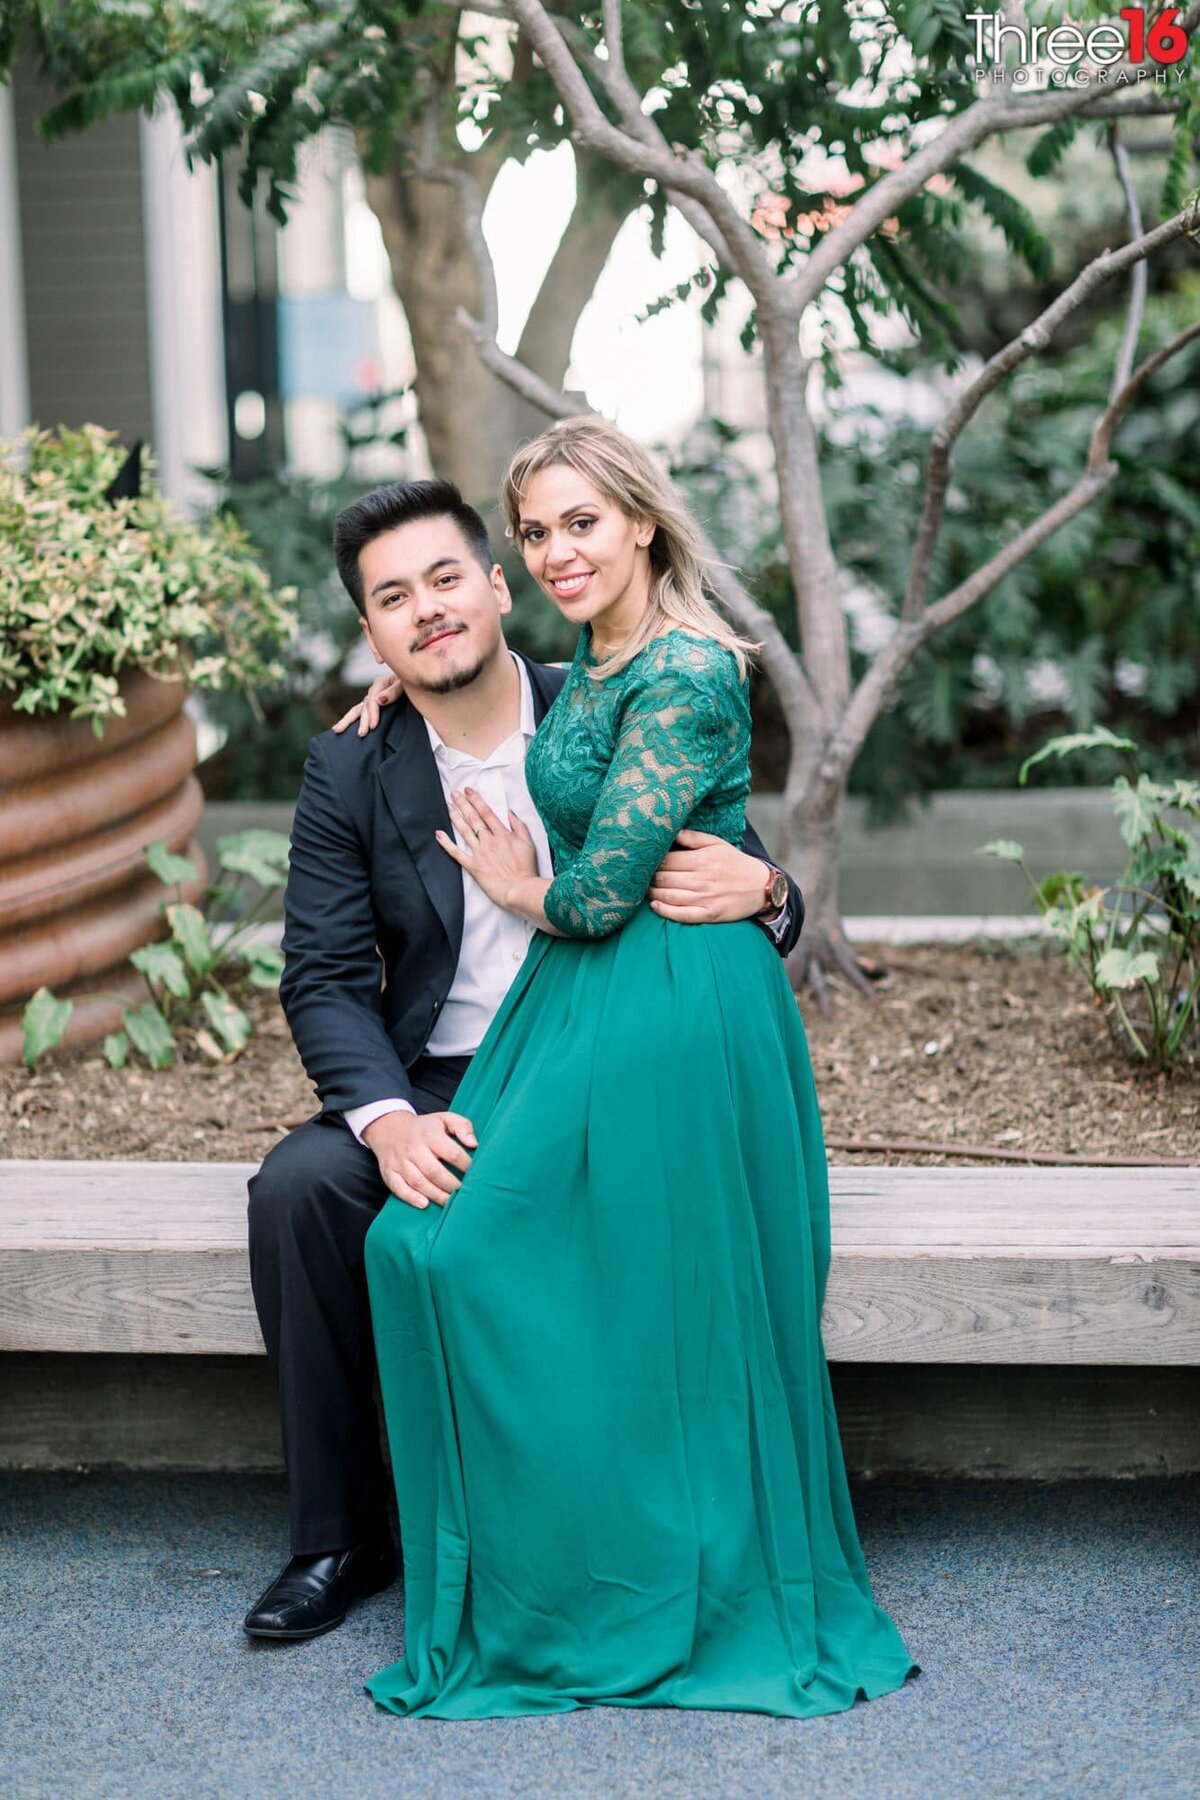 Bride to be sits on her Groom's lap during photo session